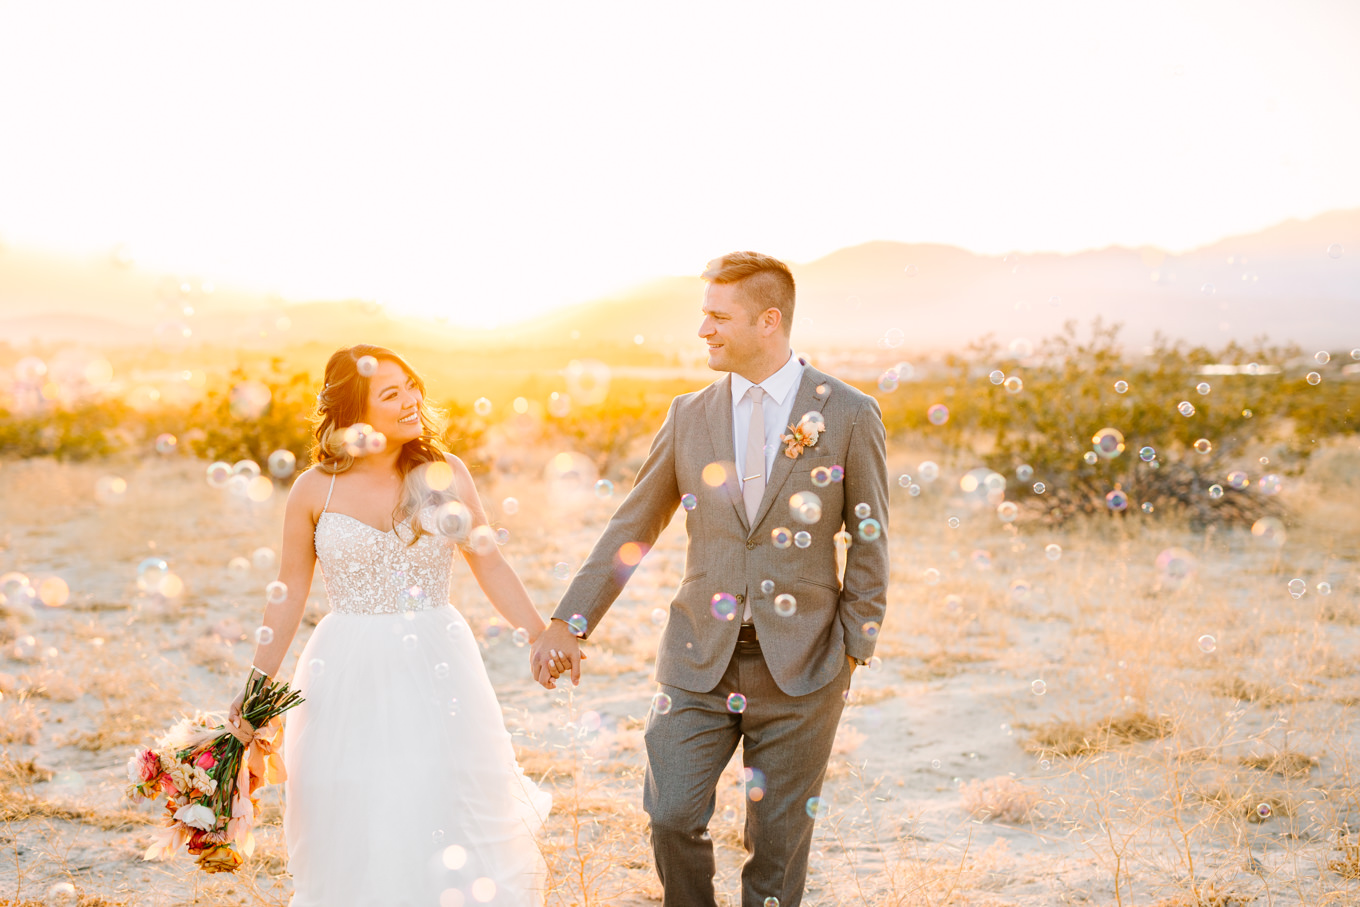 Bride and groom in the desert at sunset with bubbles | Pink and orange Lautner Compound wedding | Colorful Palm Springs wedding photography | #palmspringsphotographer #palmspringswedding #lautnercompound #southerncaliforniawedding  Source: Mary Costa Photography | Los Angeles